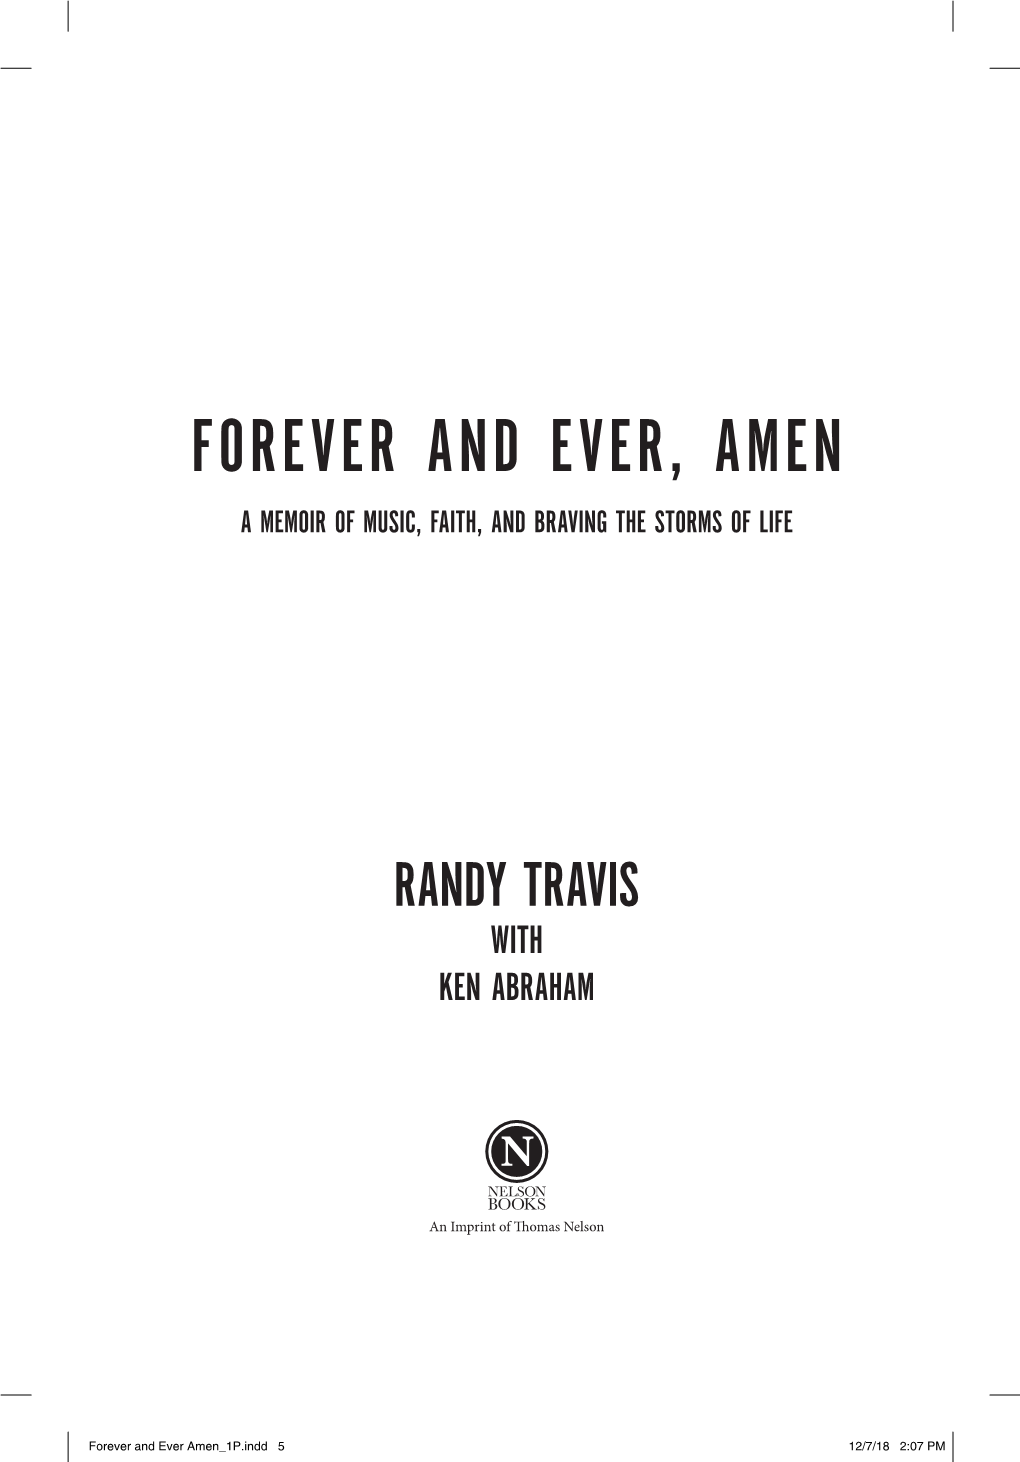 Forever and Ever, Amen a Memoir of Music, Faith, and Braving the Storms of Life